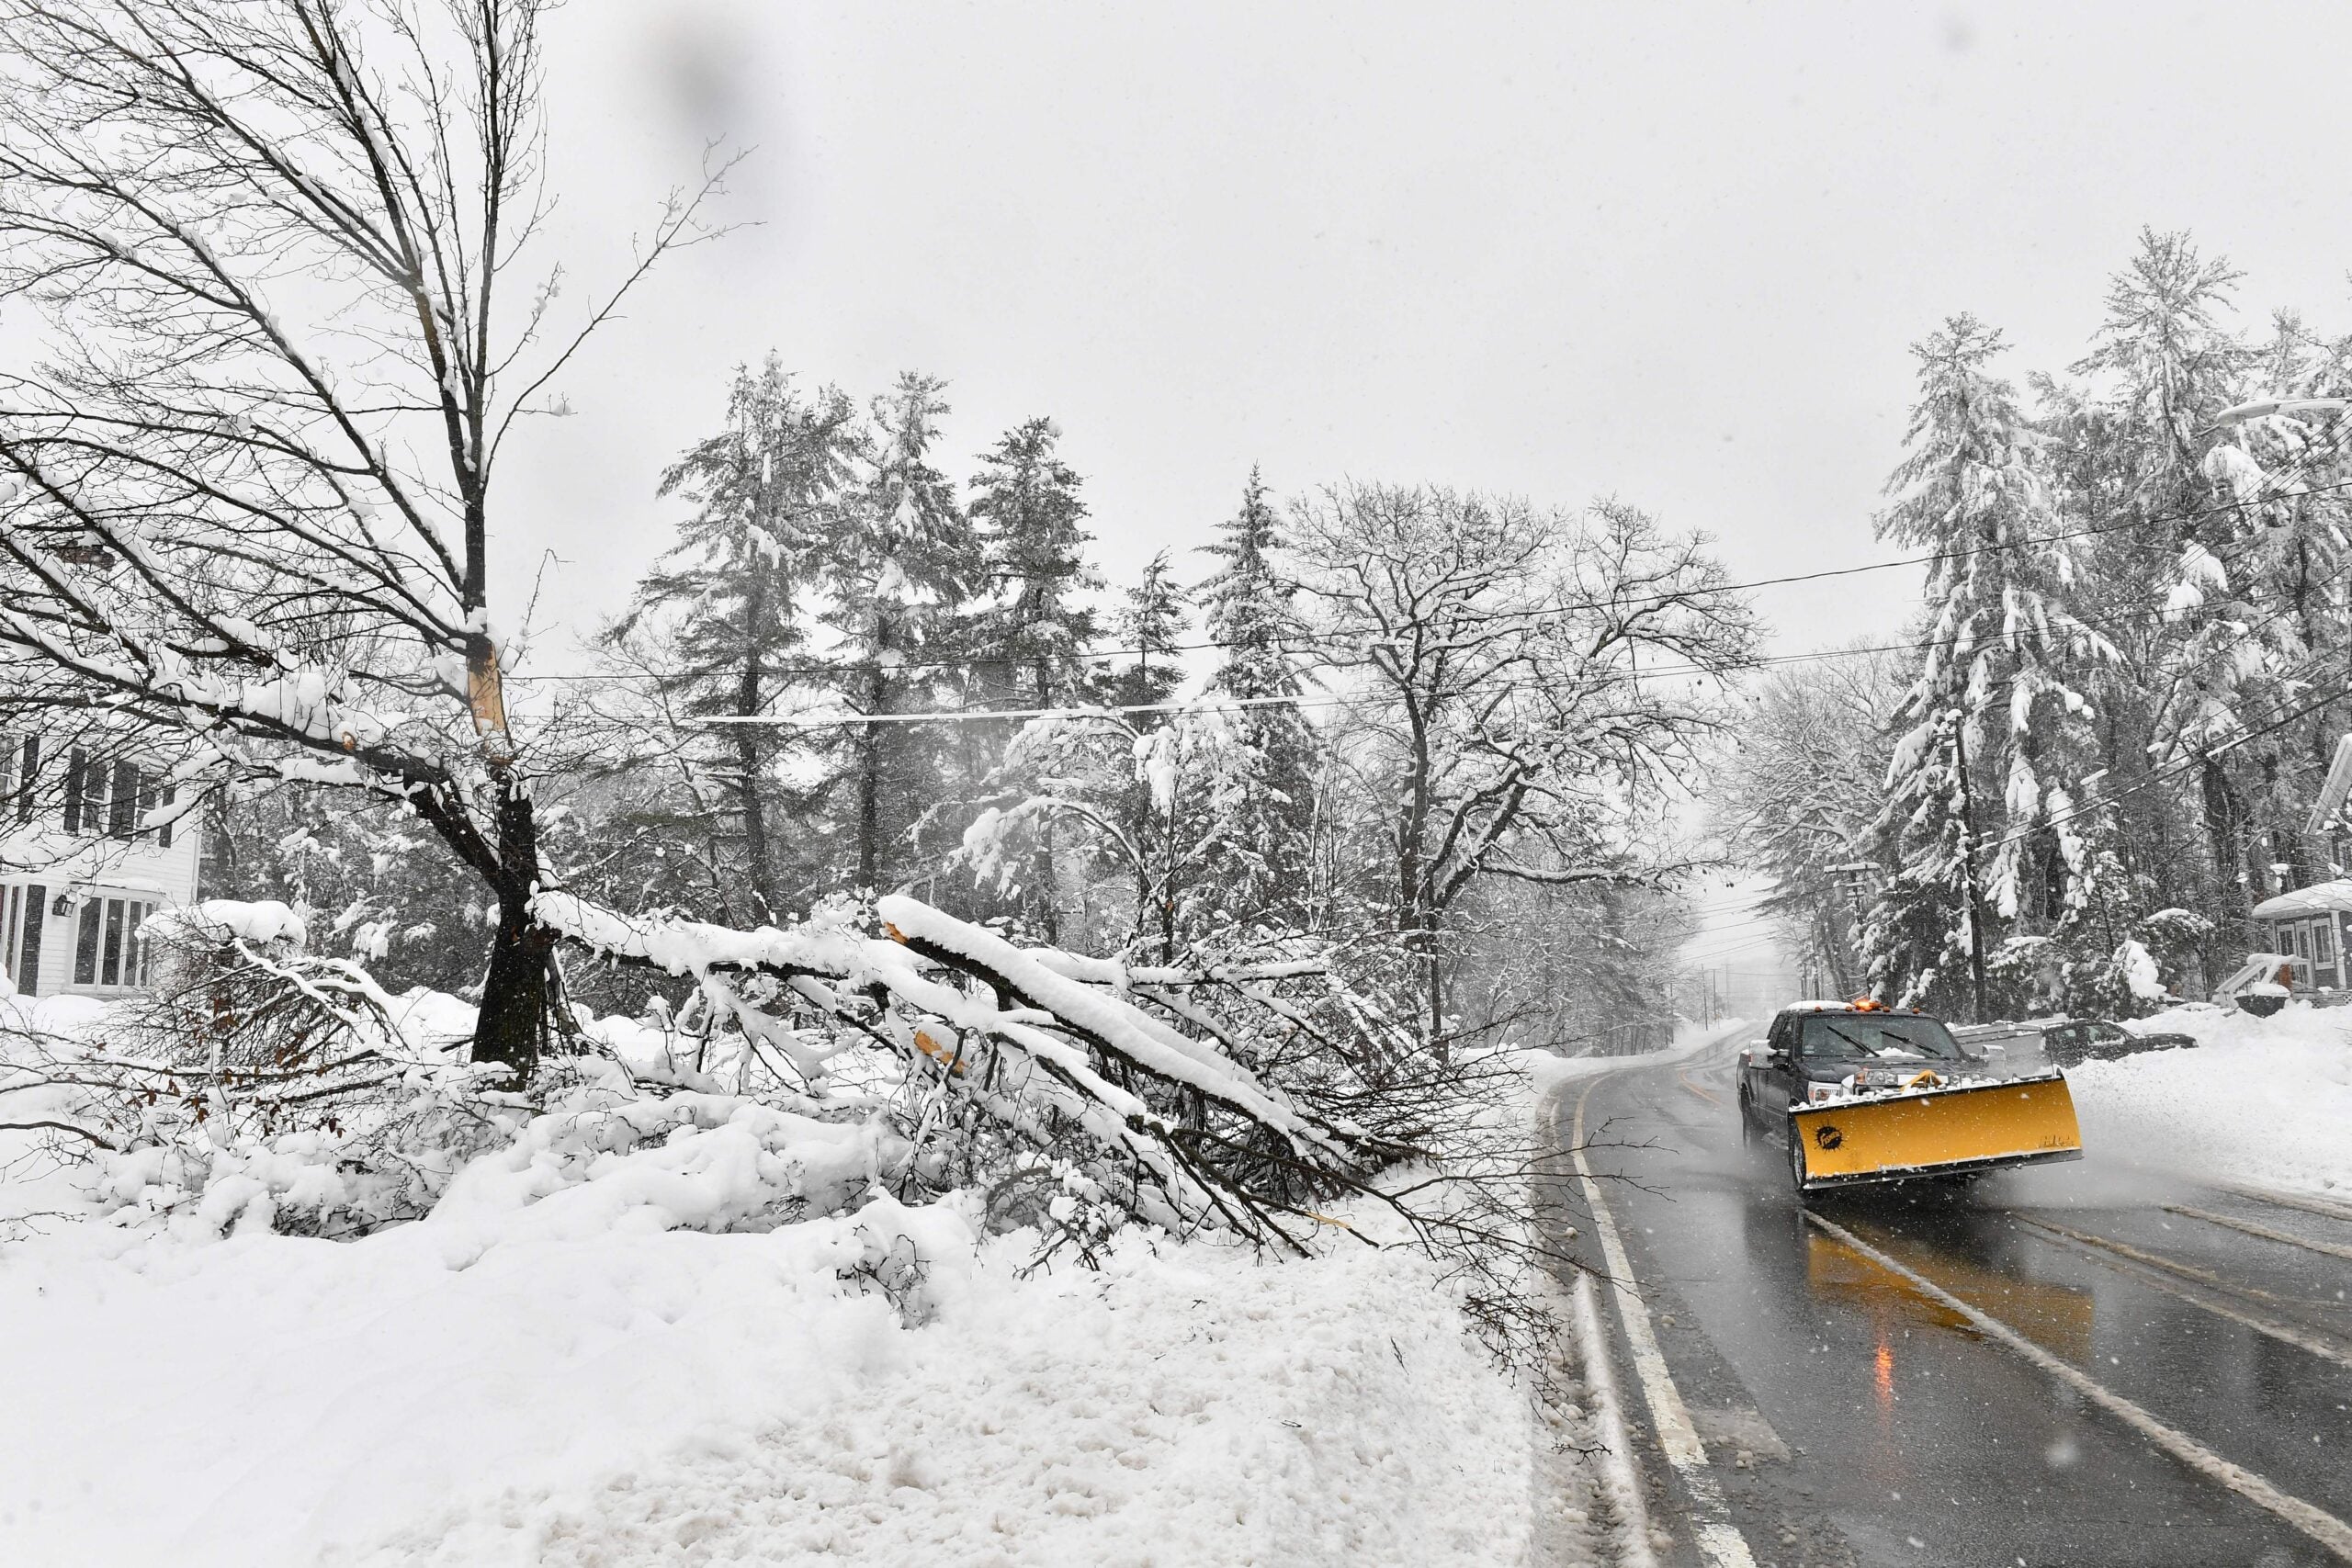 A tree is damaged by the weight of the snow in Holden, Massachusetts, on Tuesday.